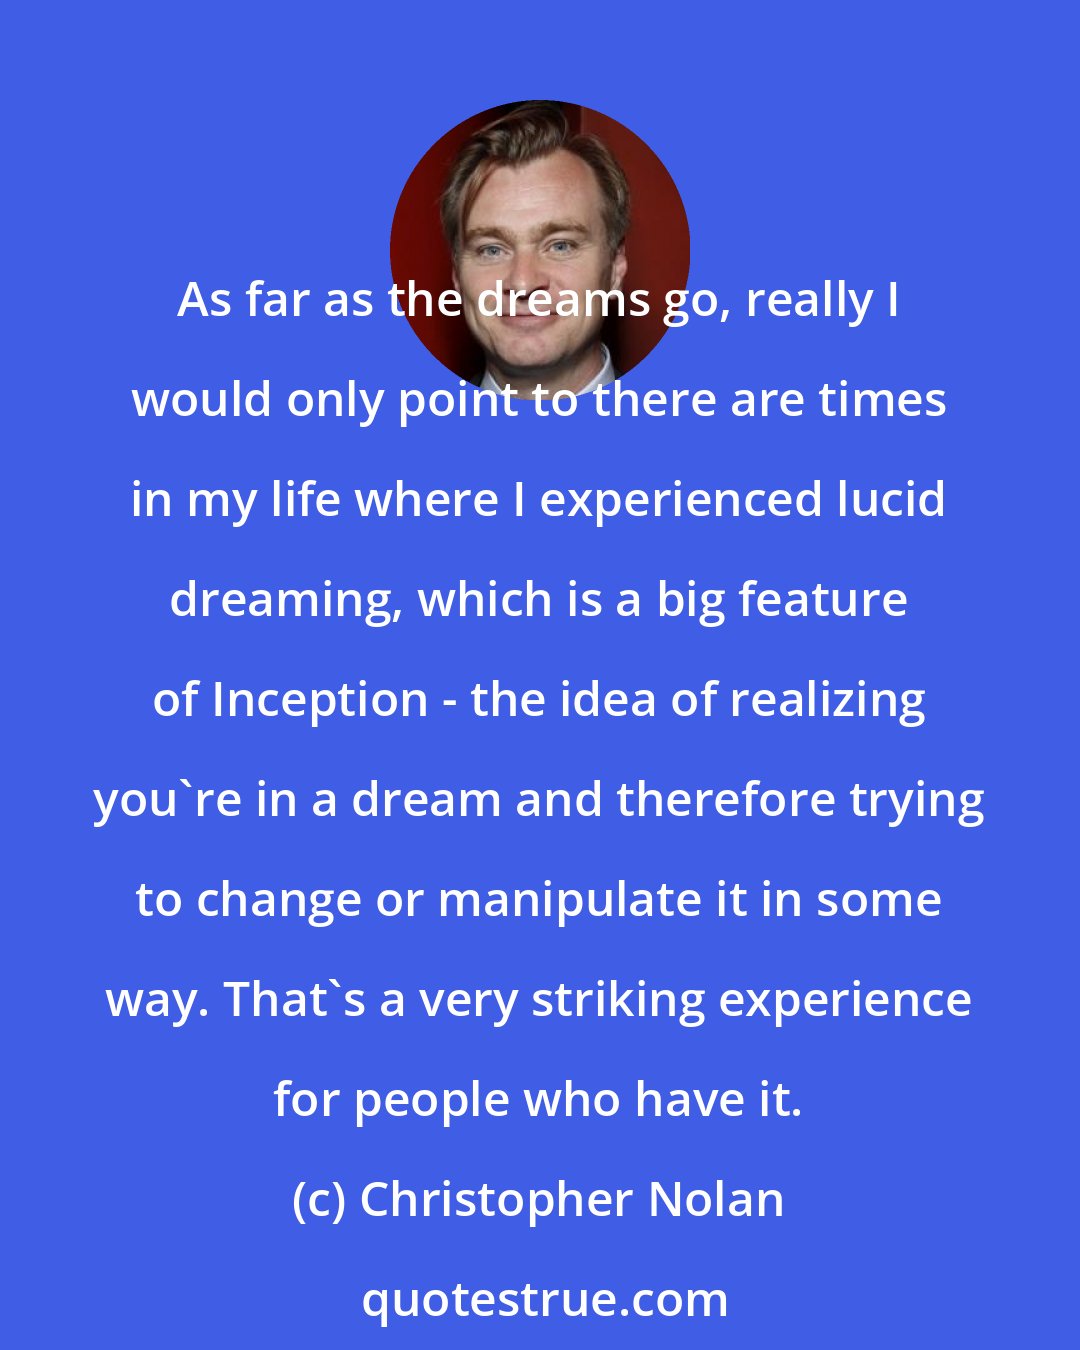 Christopher Nolan: As far as the dreams go, really I would only point to there are times in my life where I experienced lucid dreaming, which is a big feature of Inception - the idea of realizing you're in a dream and therefore trying to change or manipulate it in some way. That's a very striking experience for people who have it.